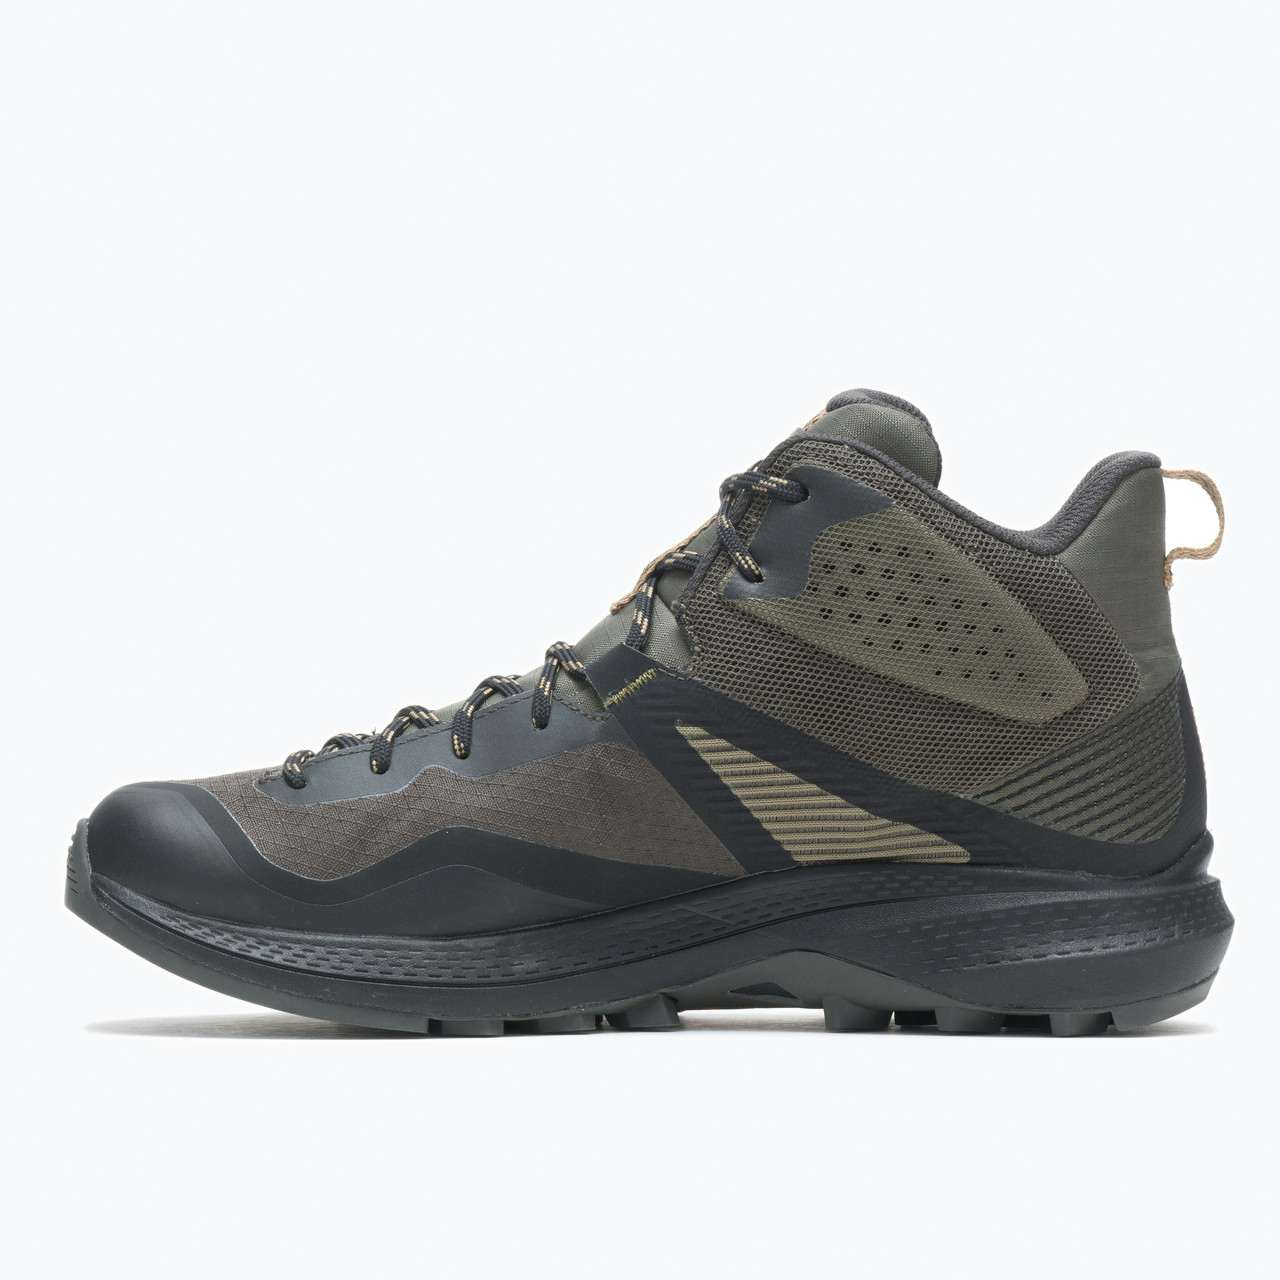 MQM 3 Mid Gore-Tex Light Trail Shoes Olive